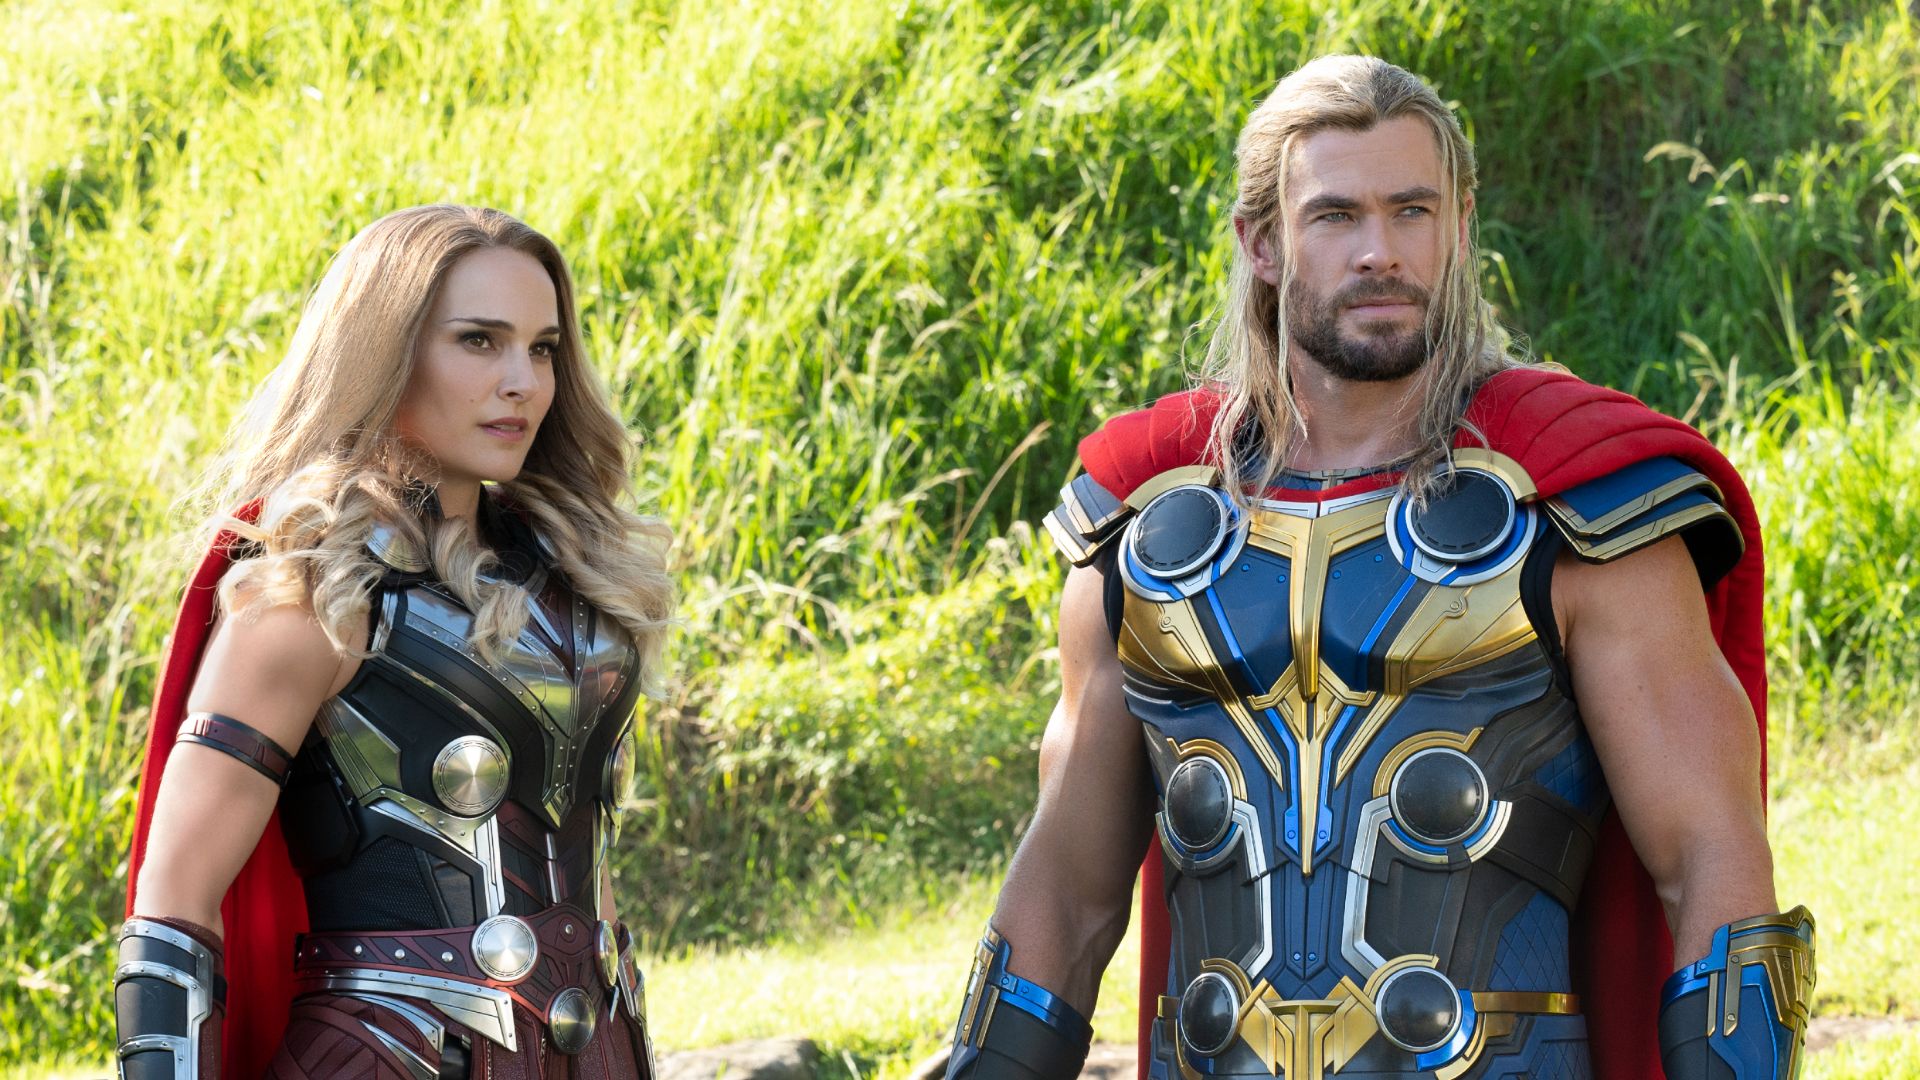 Natalie Portman as Jane Foster the Mighty Thor and Chris Hemsworth as Thor Odinson in Thor: Love and Thunder